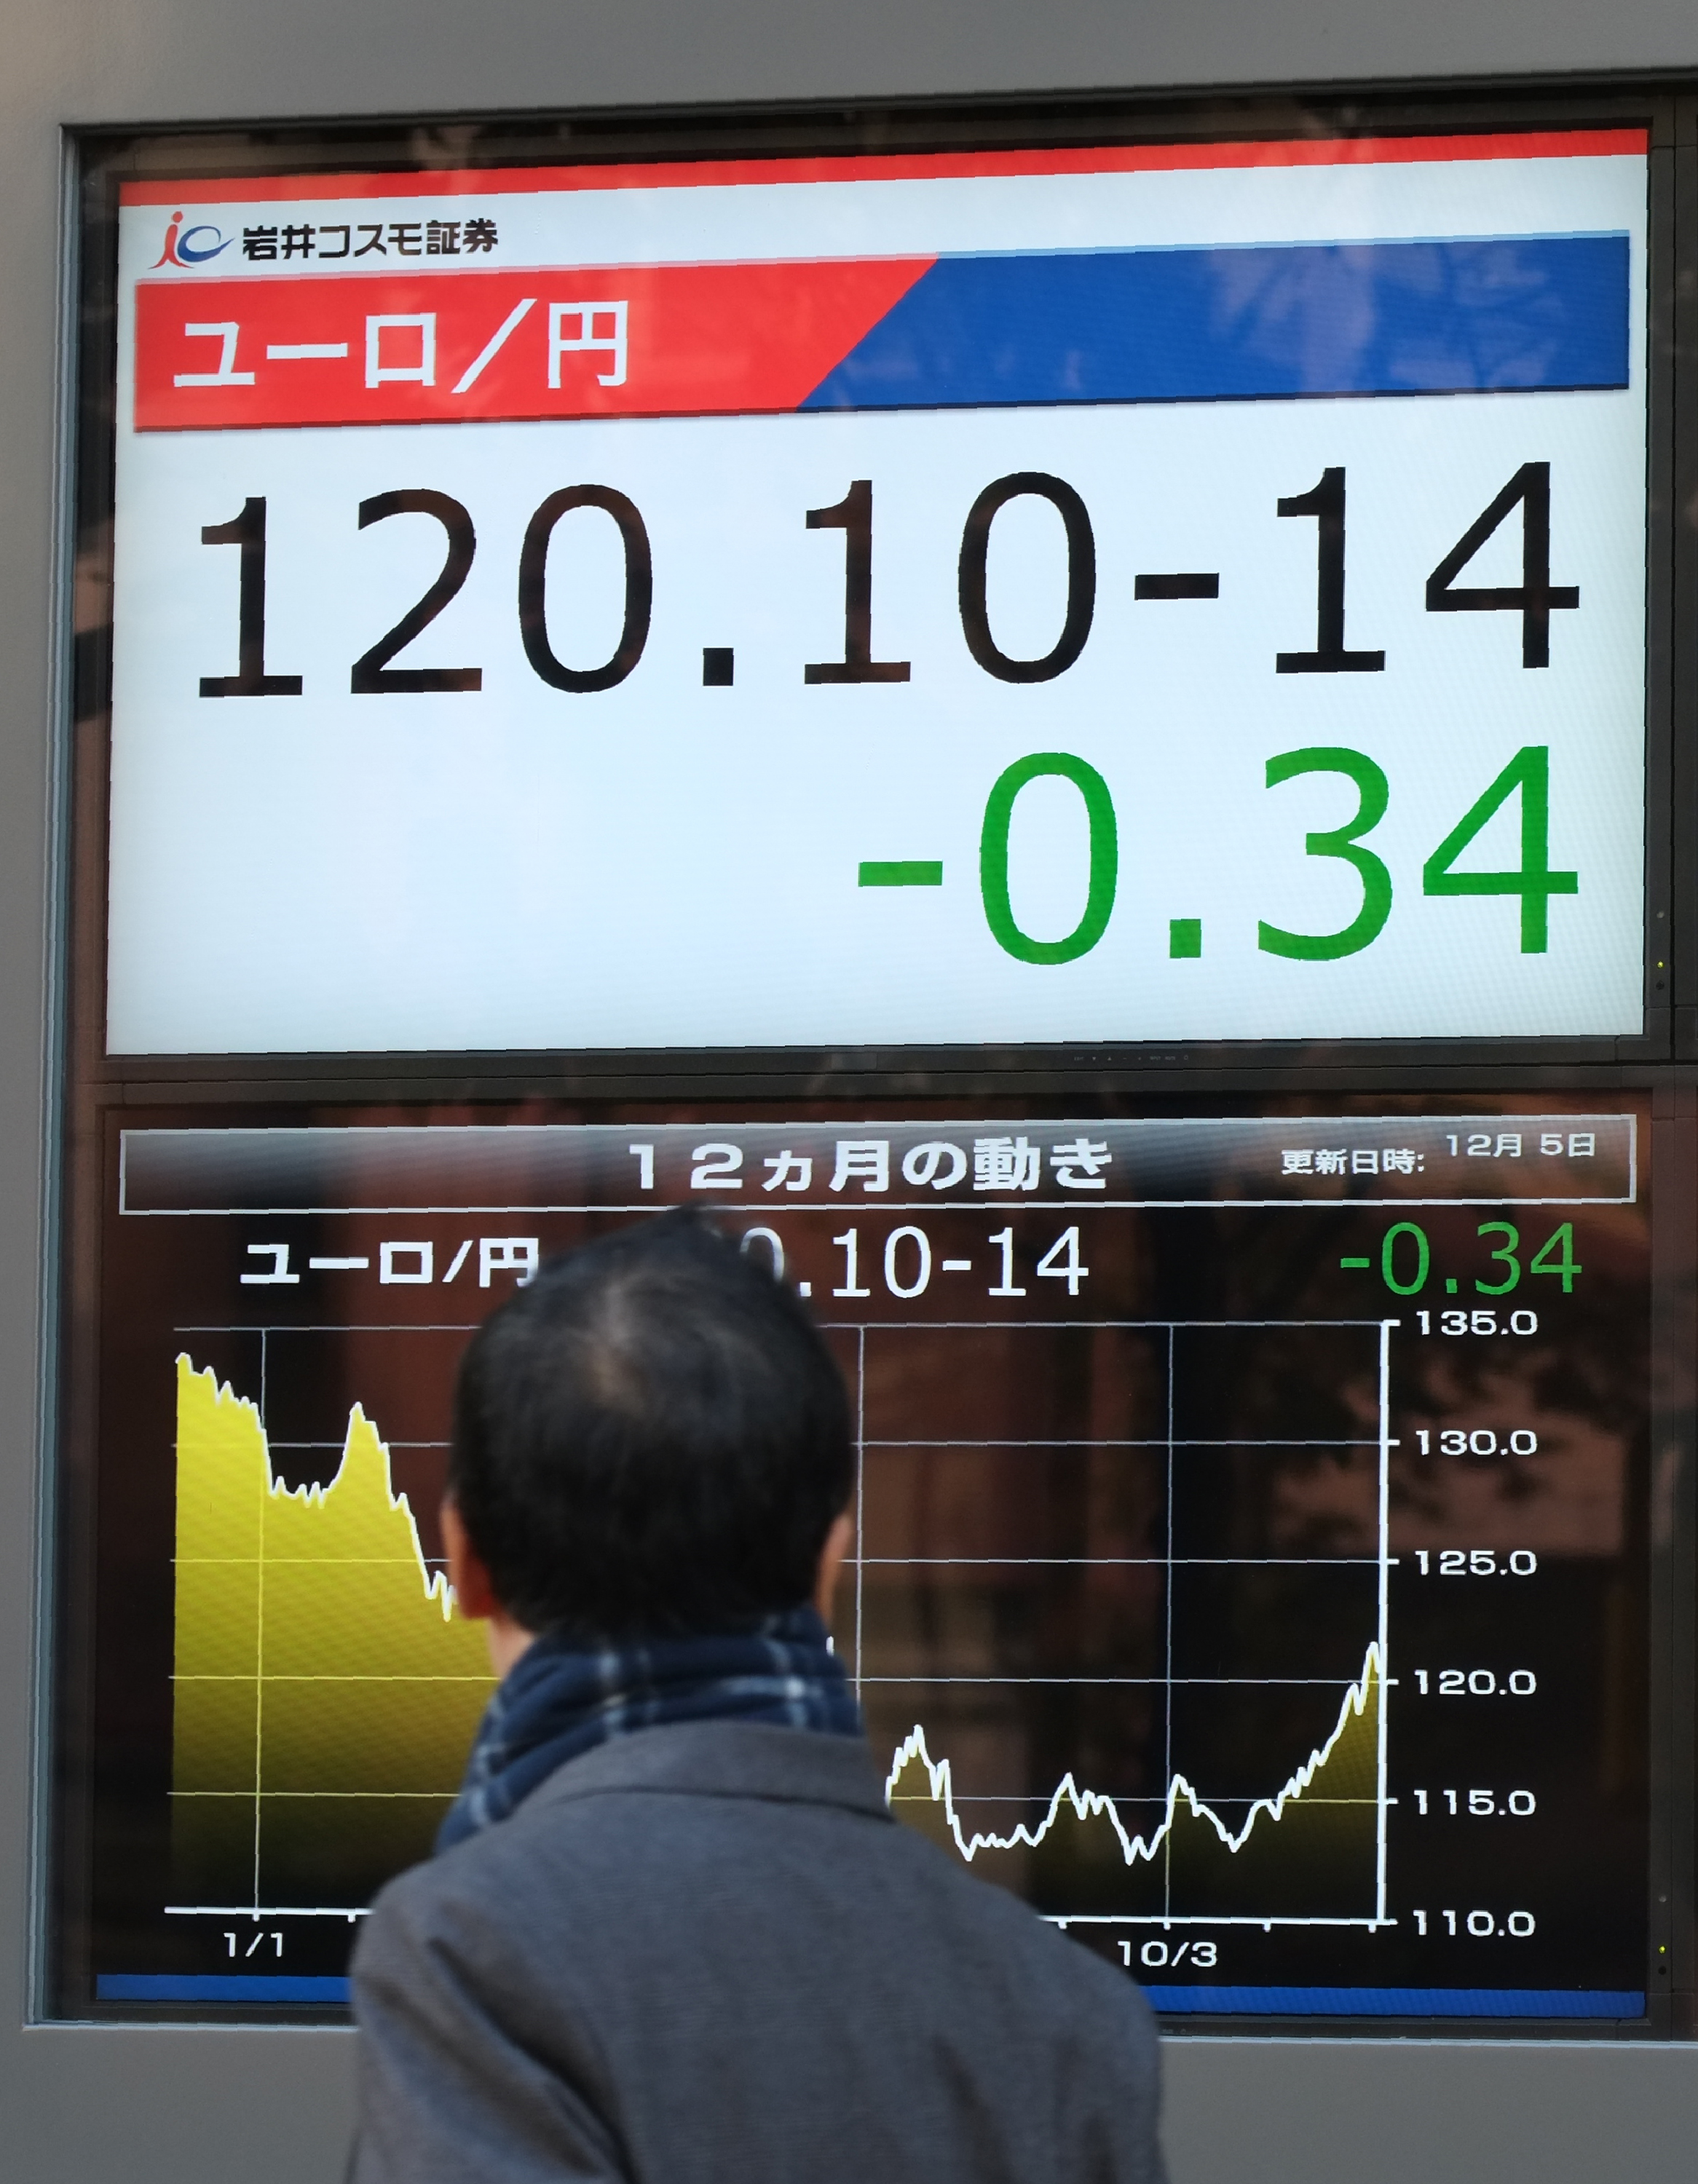 A pedestrian looks at an electric quotation board displaying the current exchange rate of the Japanese yen against the euro in Tokyo on December 5, 2016. Tokyo stocks opened lower on December 5 after Italian Prime Minister Matteo Renzi's resignation following a crushing referendum defeat sparked worries about political instability in the key eurozone country. / AFP PHOTO / KAZUHIRO NOGI